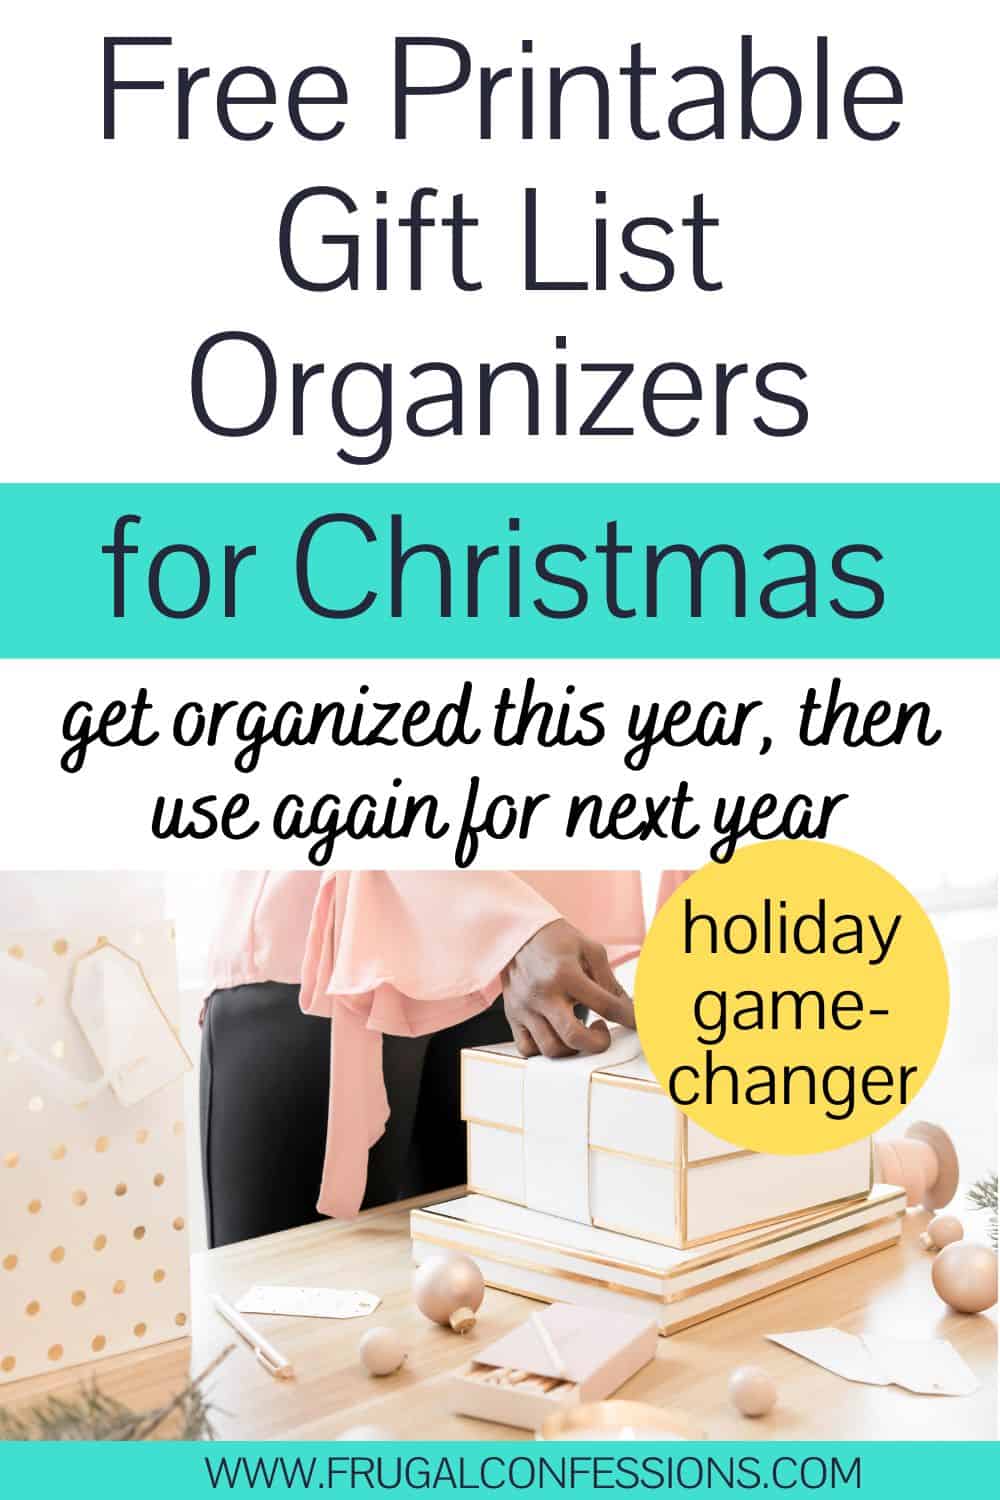 woman wrapping gifts with list next to her, text overlay "free printable gift list organizer for Christmas"